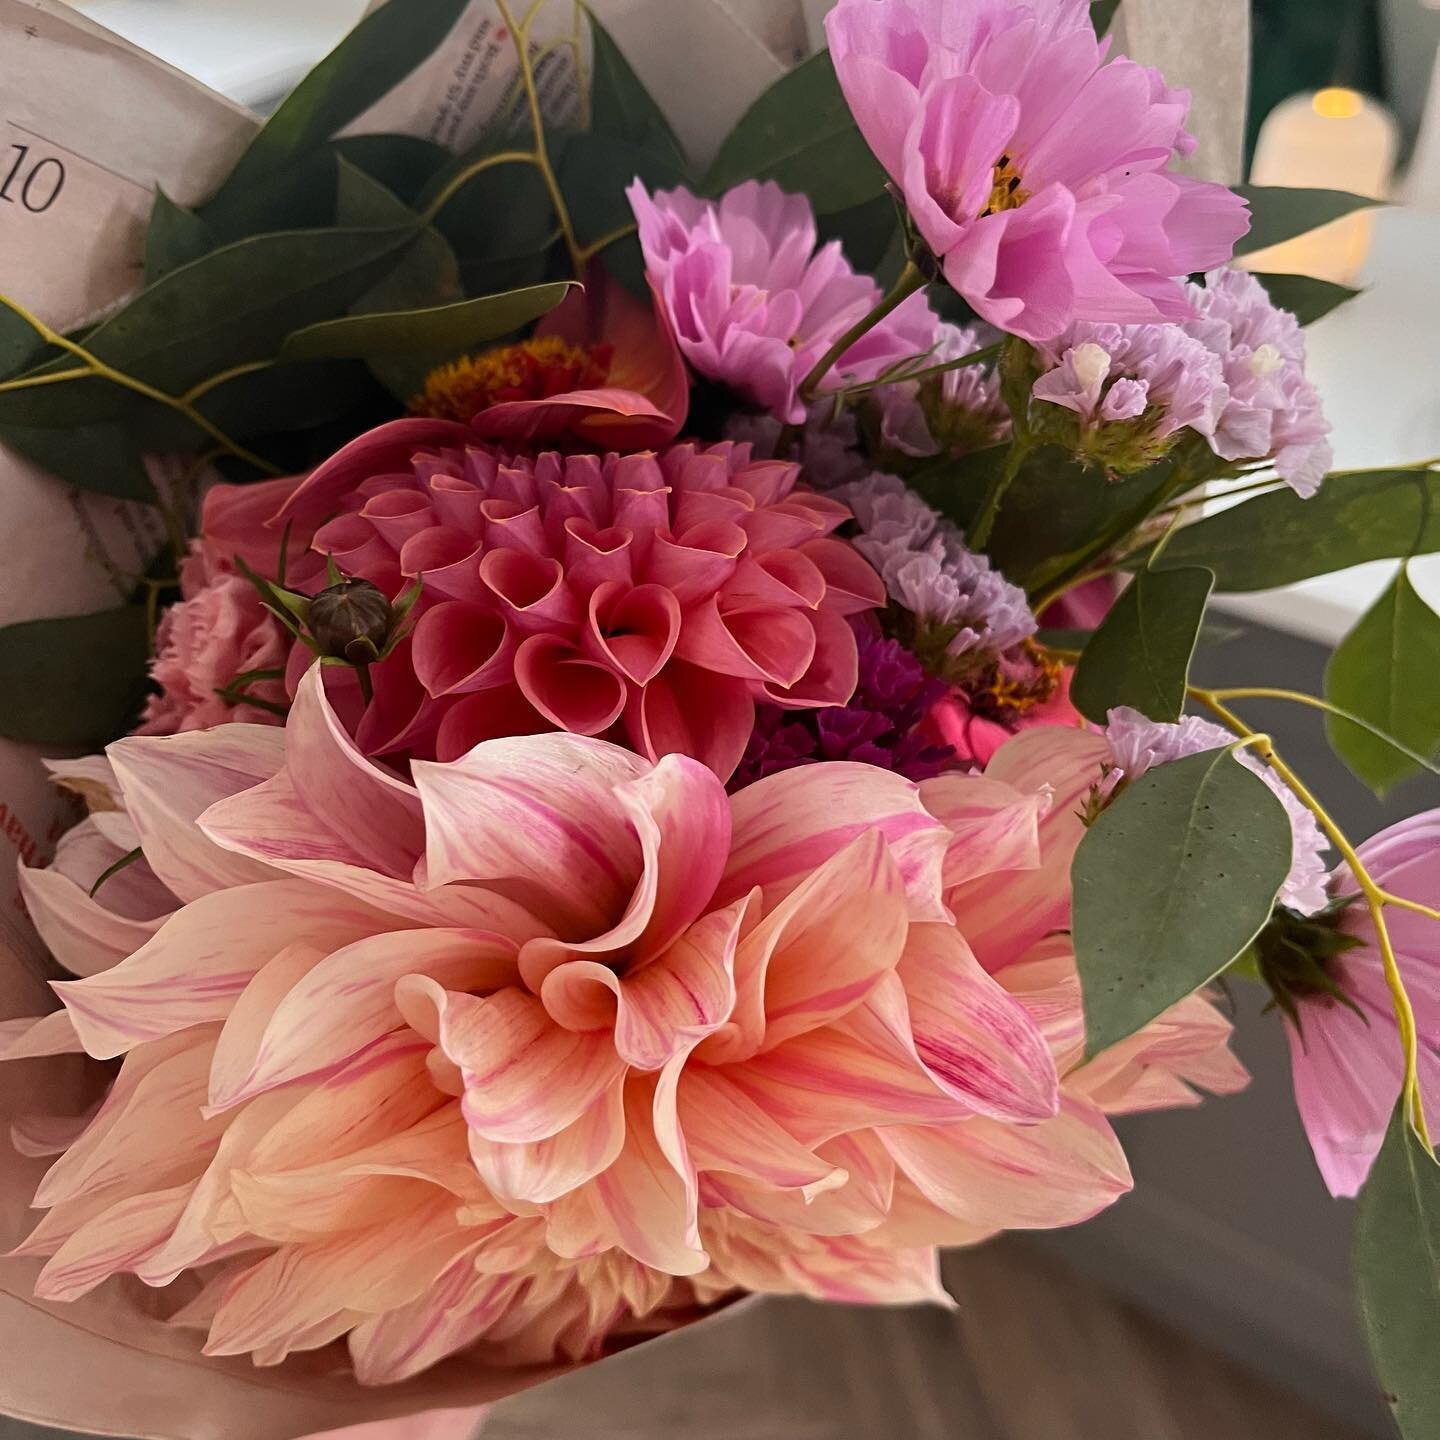 Beautiful Friday Flowers grown locally by the very talented @cecily_blooms flower farmer.
She does an amazing #fiverfriday deal! Another local business that we love to support. 

#fridayflowers #locallygrown #smallbusiness #exeter #earmattersexeter #